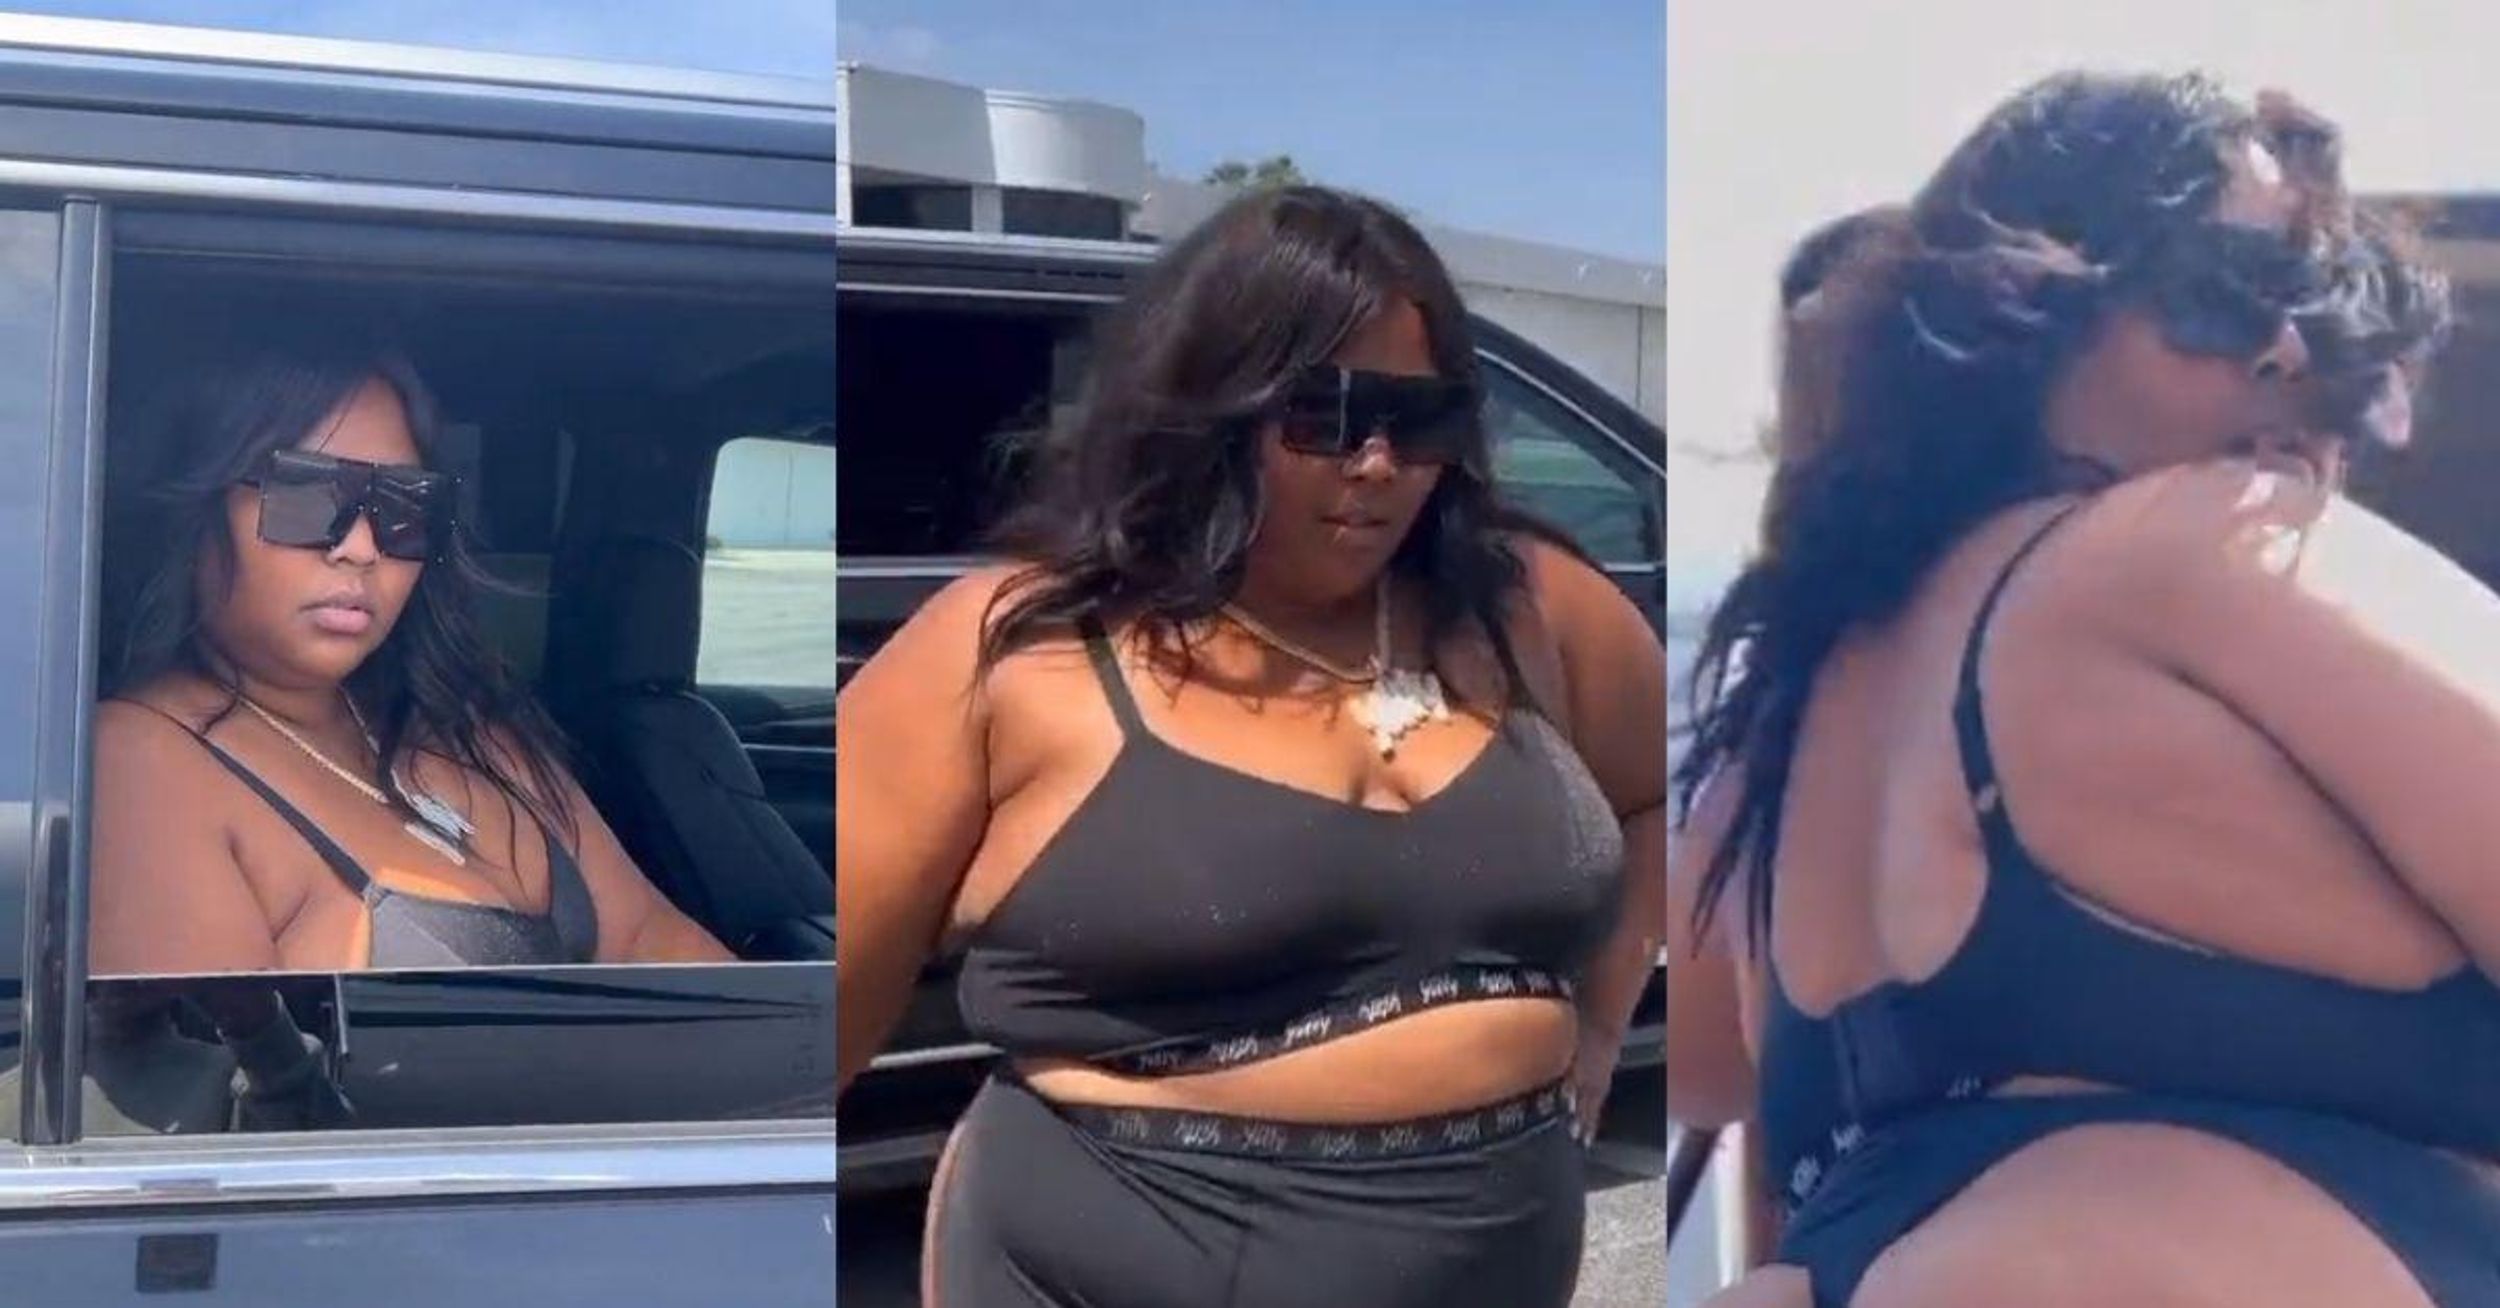 Viral Video Of Lizzo Boarding Private Jet In Leggings With Back Cut Out Sparks Heated Debate